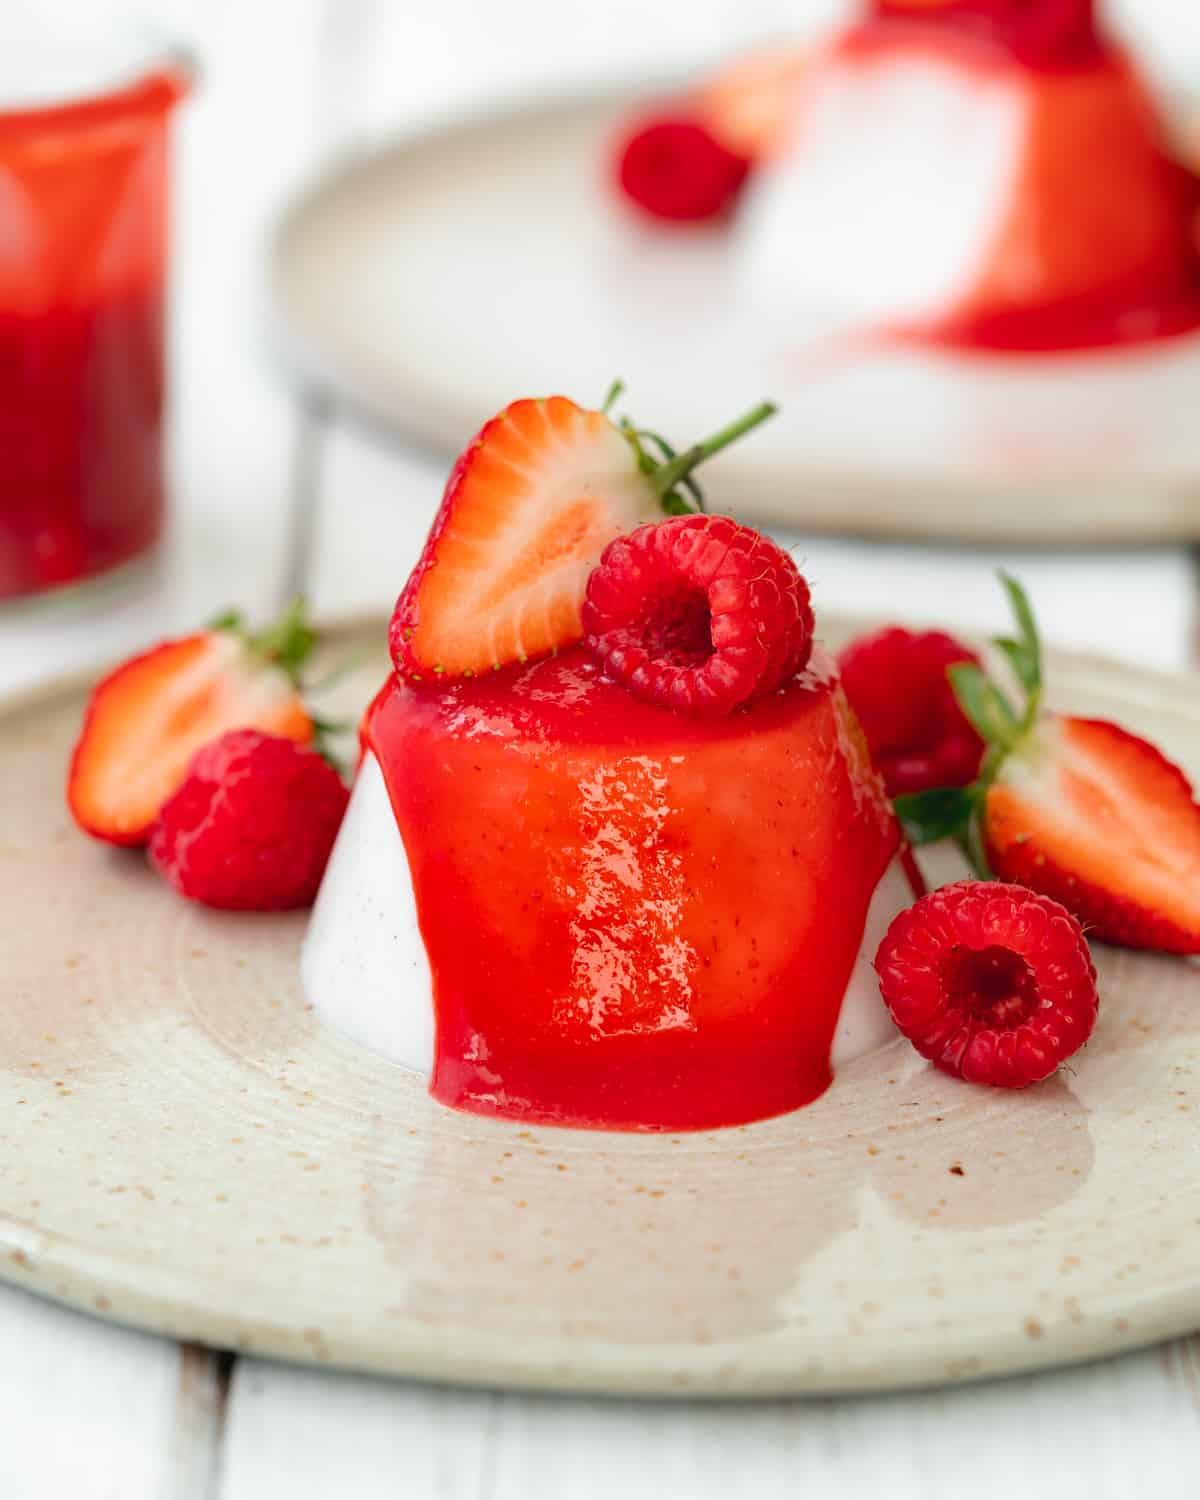 panna cotta without gelatin with fresh strawberries and raspberries.